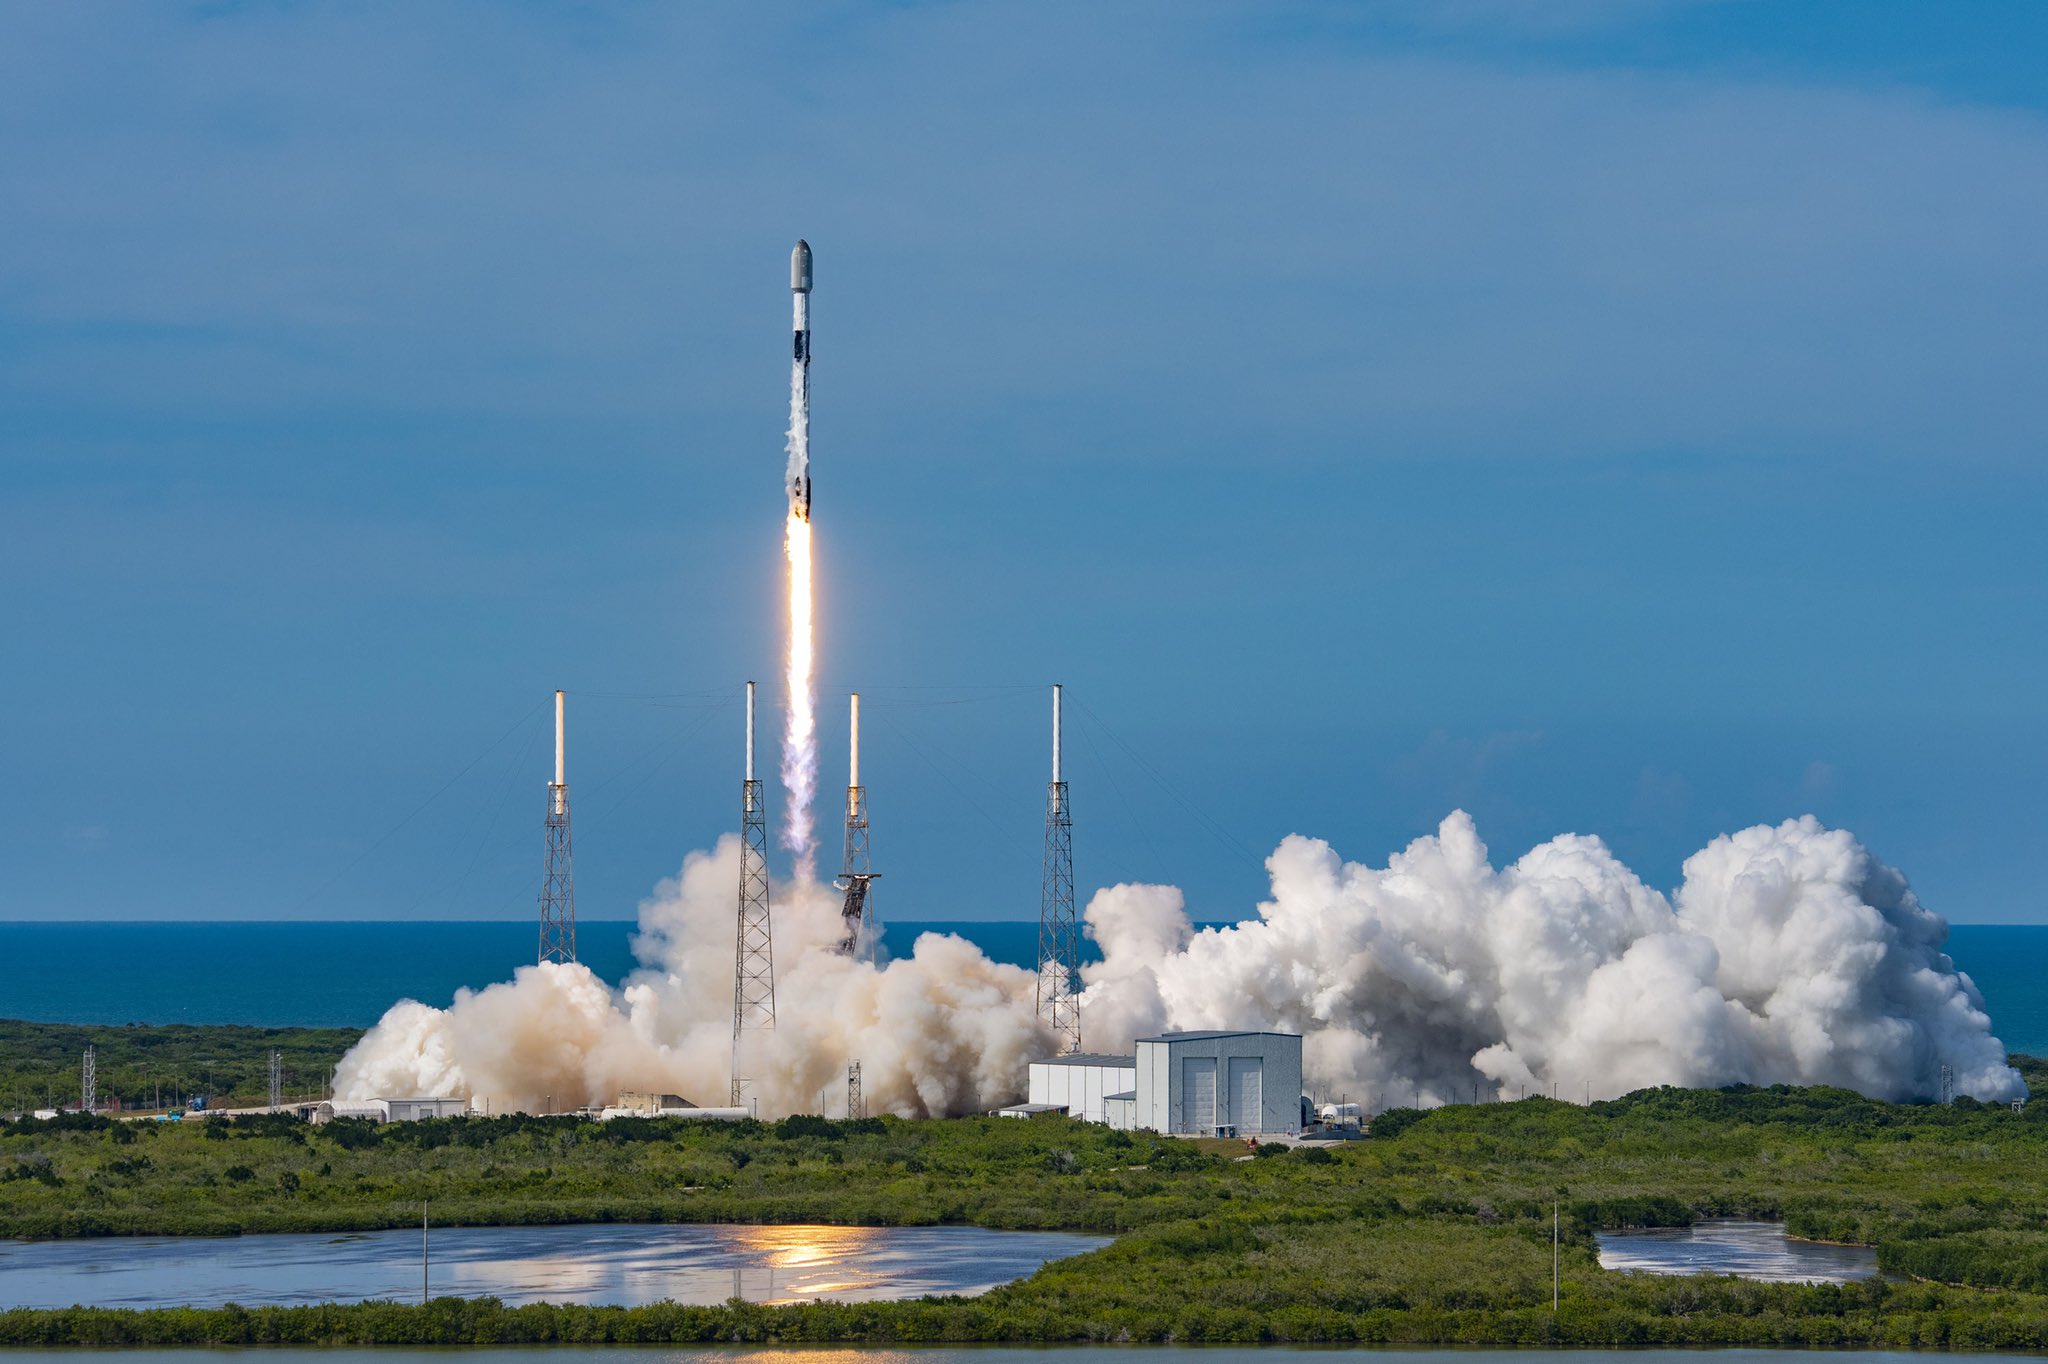 SpaceX launches another batch of Starlink satellites in less than 24 hours!